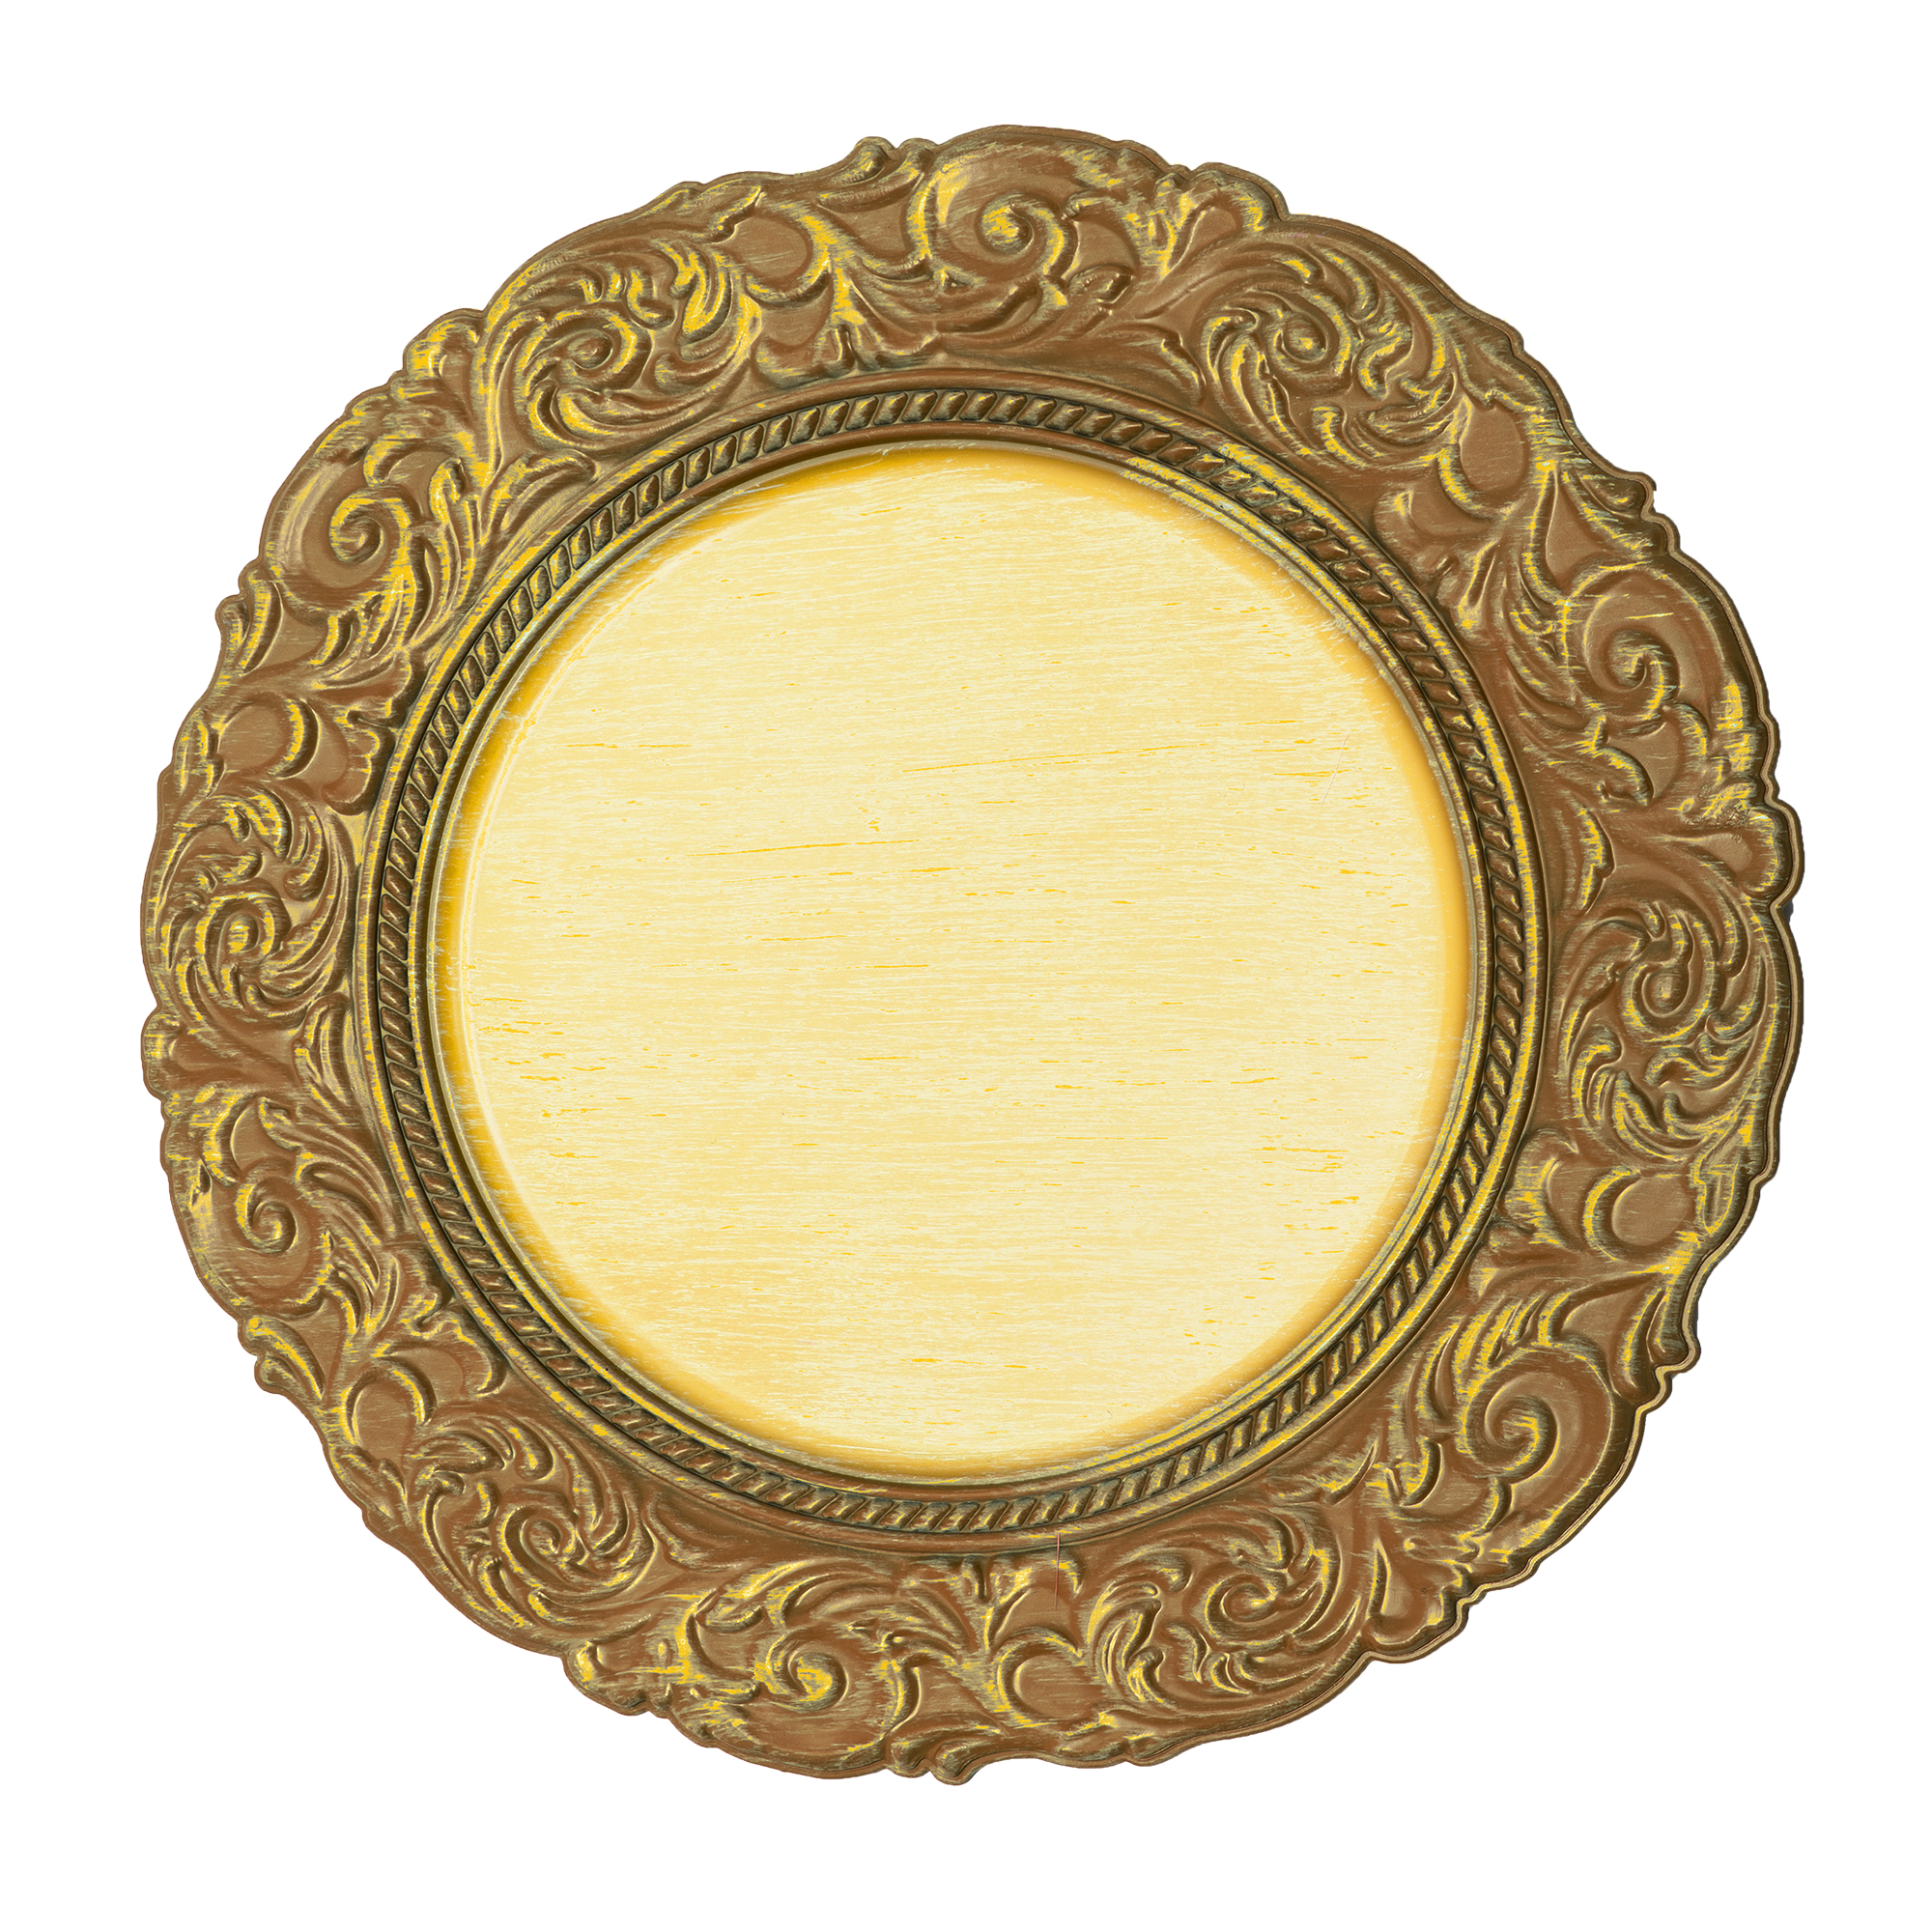 Antique Look Plastic Charger Plate 14" - Gold